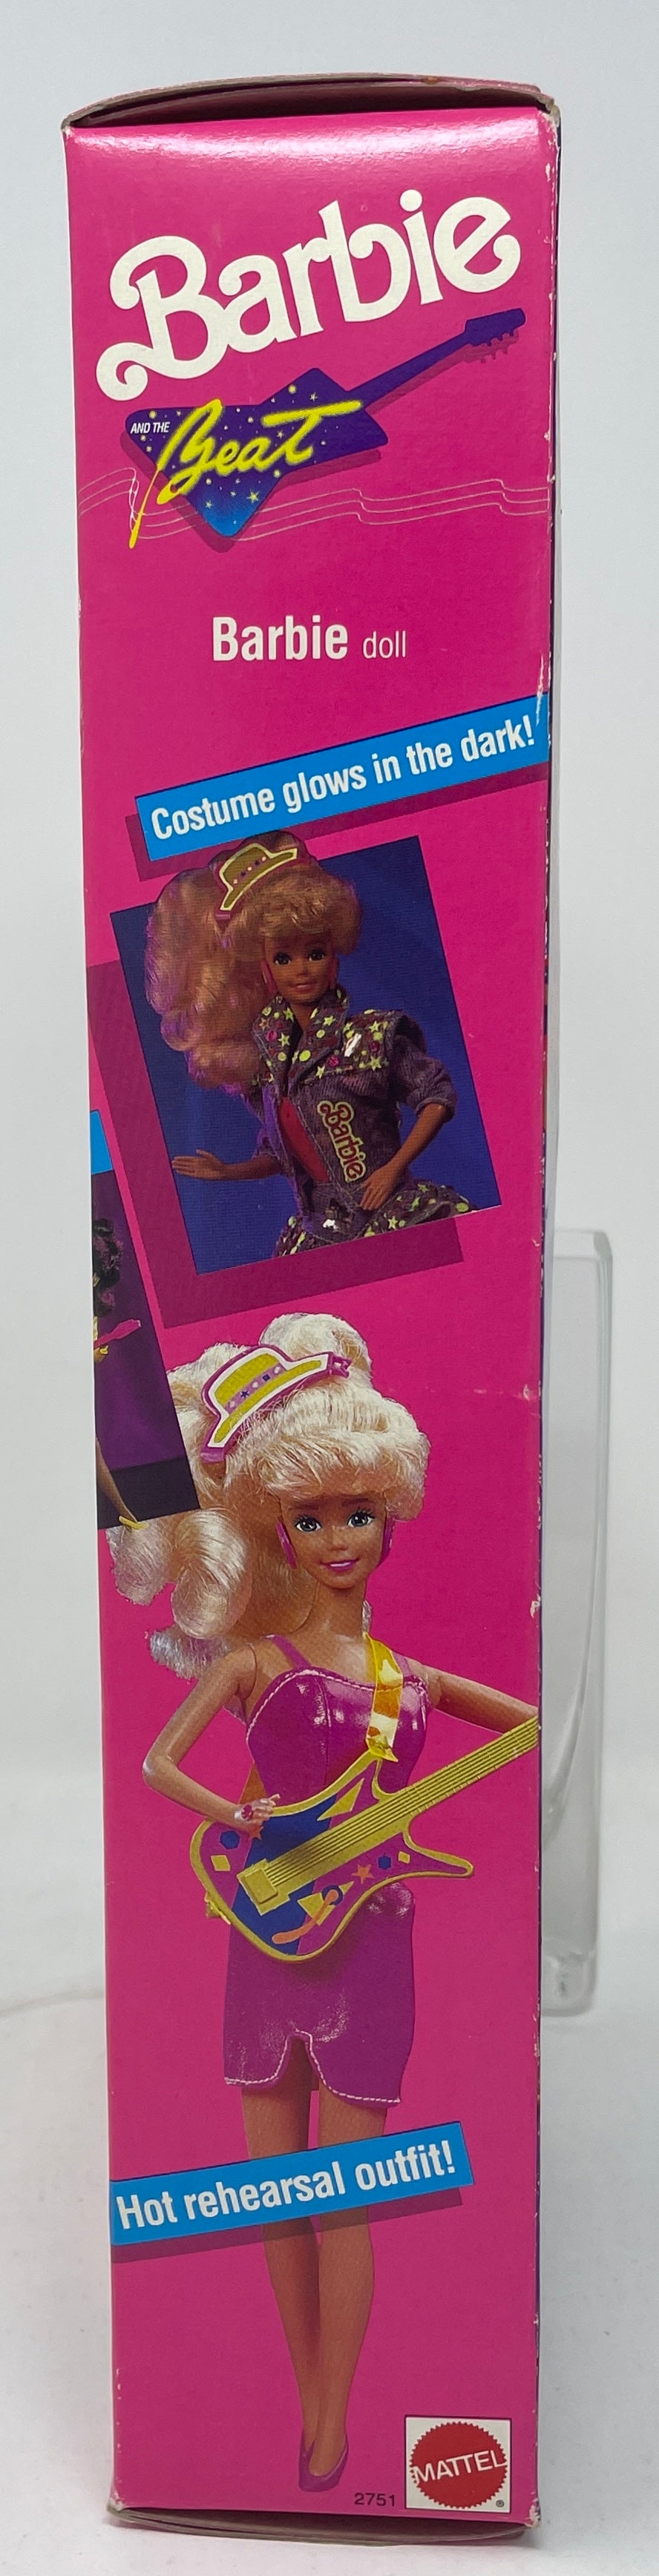 BARBIE - BARBIE AND THE BEAT - #2751 - MATTEL 1989